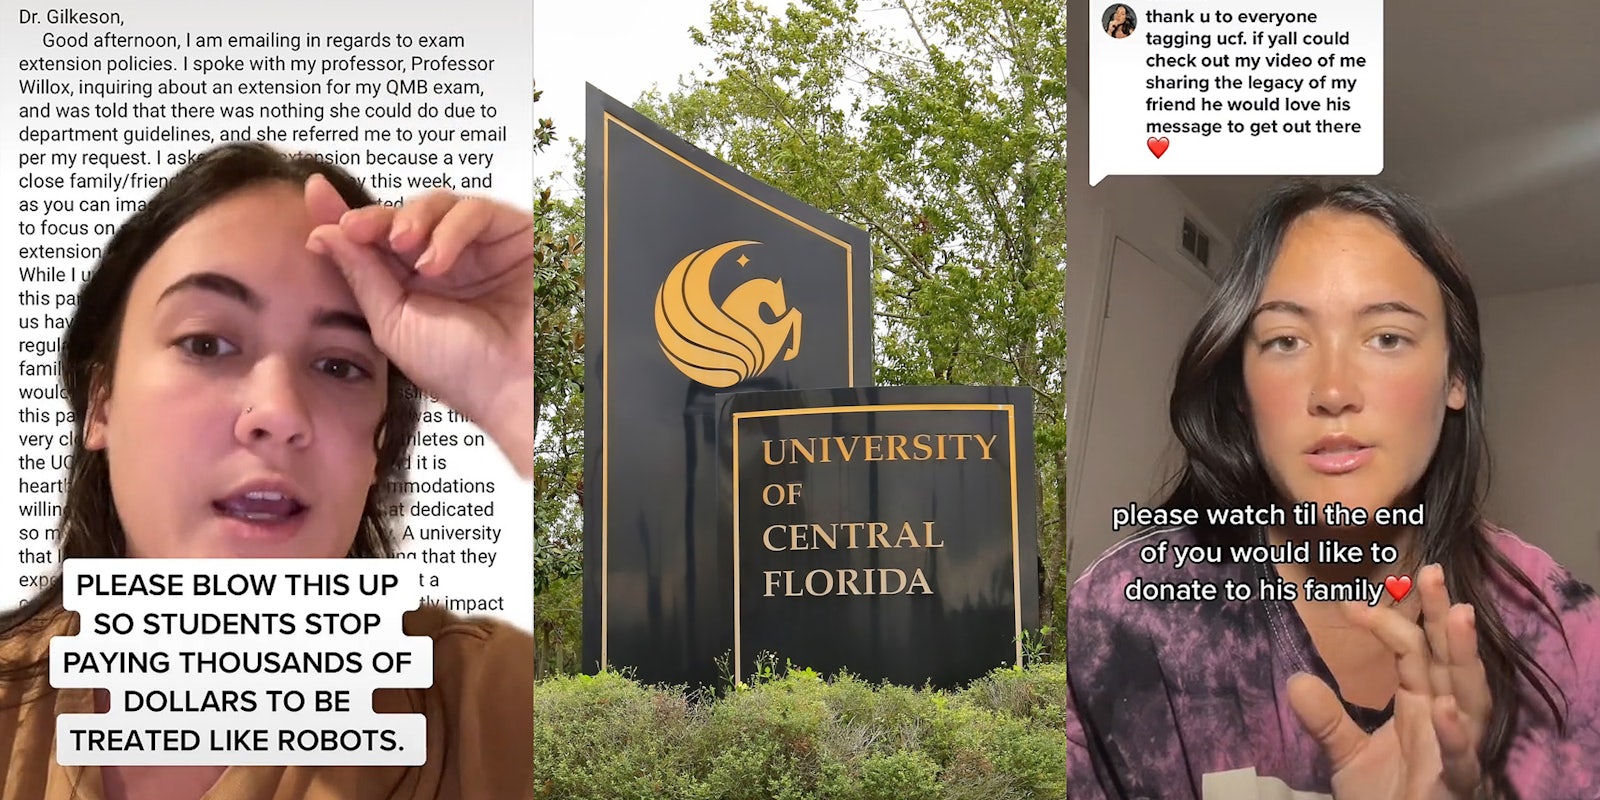 UCF student greenscreen tiktok pointing over email caption 'PLEASE BLOW THIS UP SO STUDENTS STOP PAYING THOUSANDS OF DOLLARS TO BE TREATED LIKE ROBOTS' (l) University of Central Florida school sign (c) student speaking caption 'thank u to everyone tagging ucf. if yall could check out my video of me sharing the legacy of my friend he would love his message to get out there 'please watch til the end of you would like to donate to his family' (r)